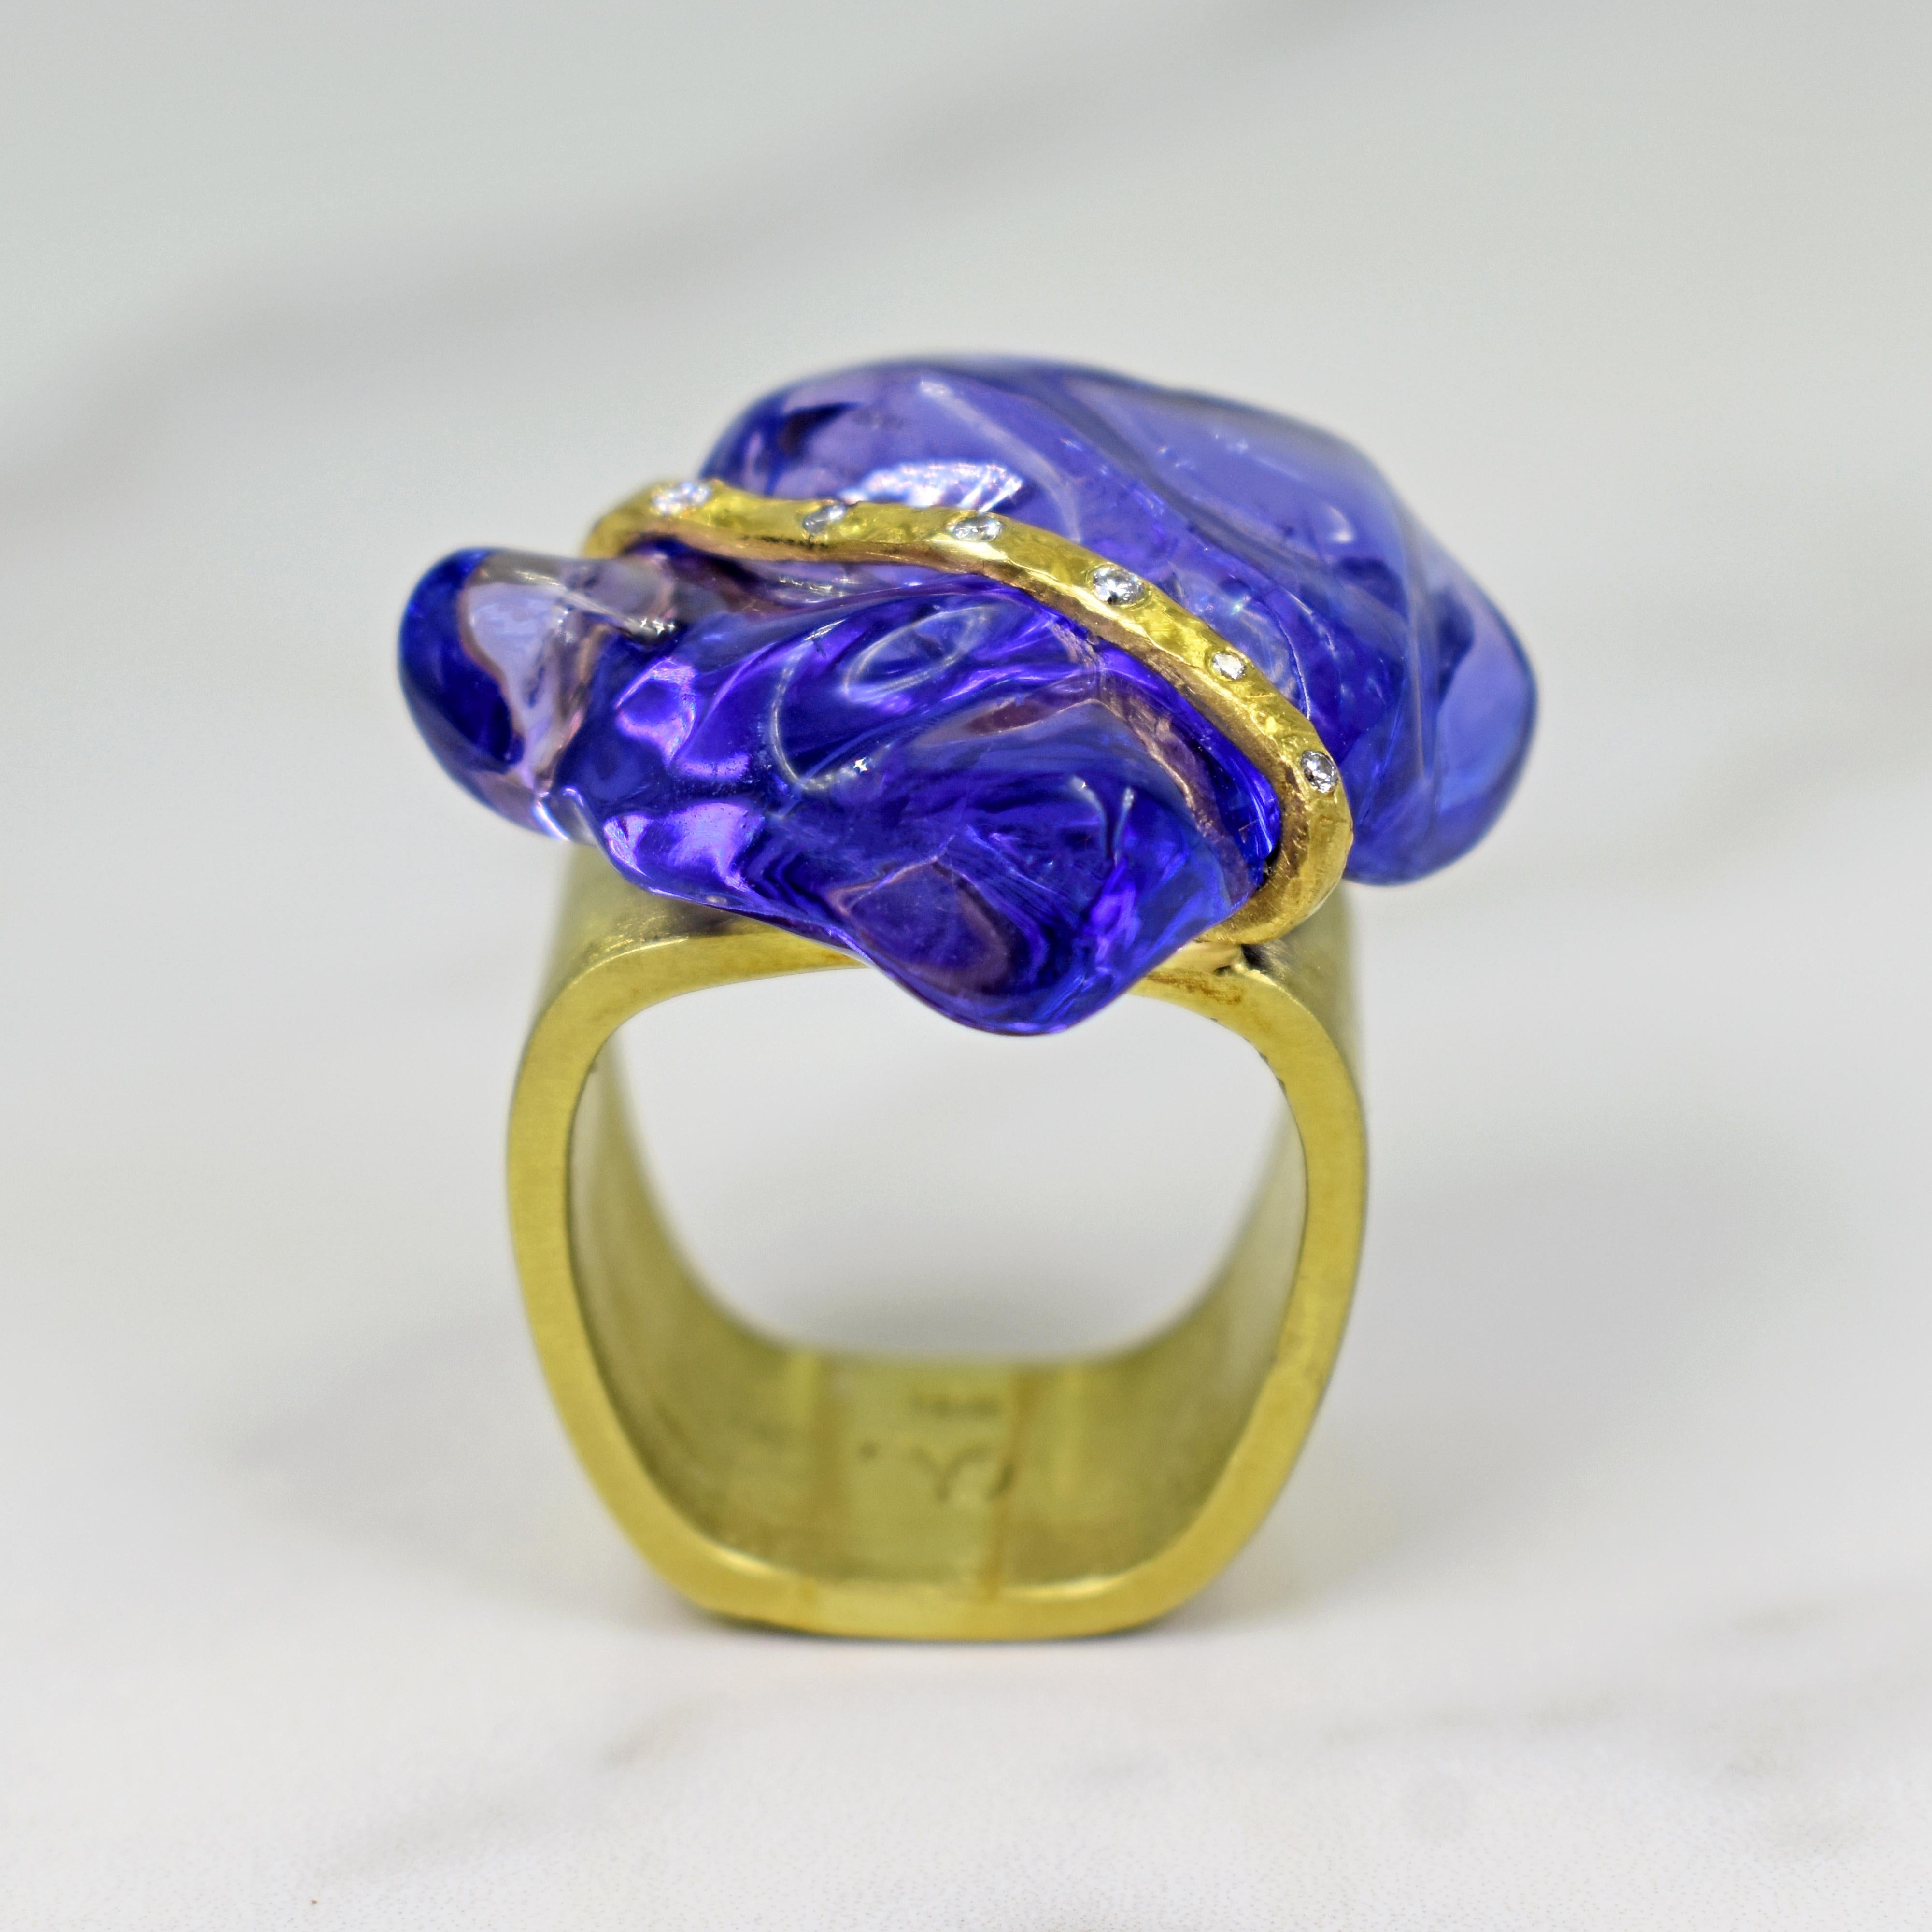 Rough, polished “Baroque” Tanzanite gemstone set with a Diamond and 22k yellow gold ribbon on an 18k gold square-shaped cocktail ring. Size 7. Unique and one-of-a-kind artisan statement ring featuring a magnificent bluish-purple Tanzanite. 